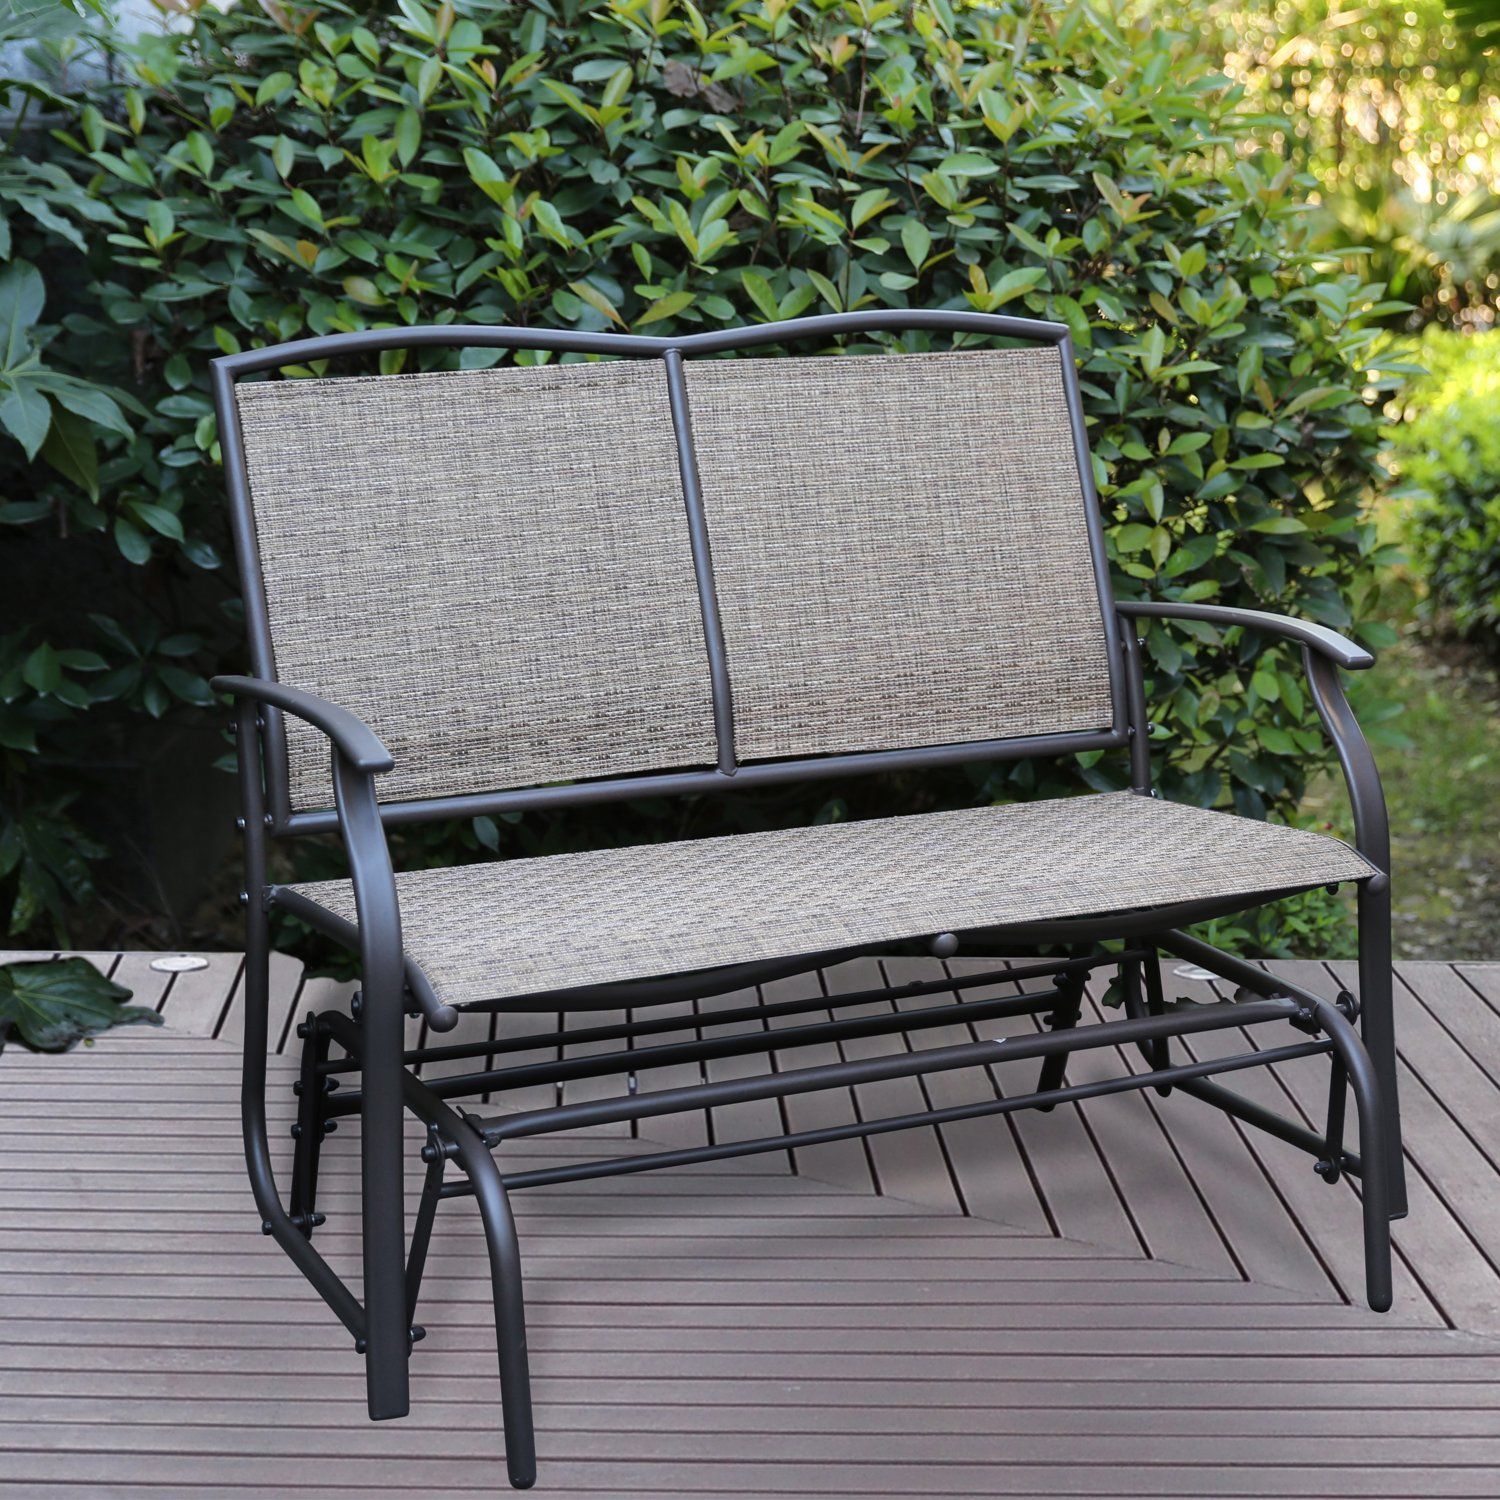 Patio Tree Patio Swing Glider Bench For 2 Person All Throughout Outdoor Patio Swing Glider Bench Chair S (View 3 of 25)